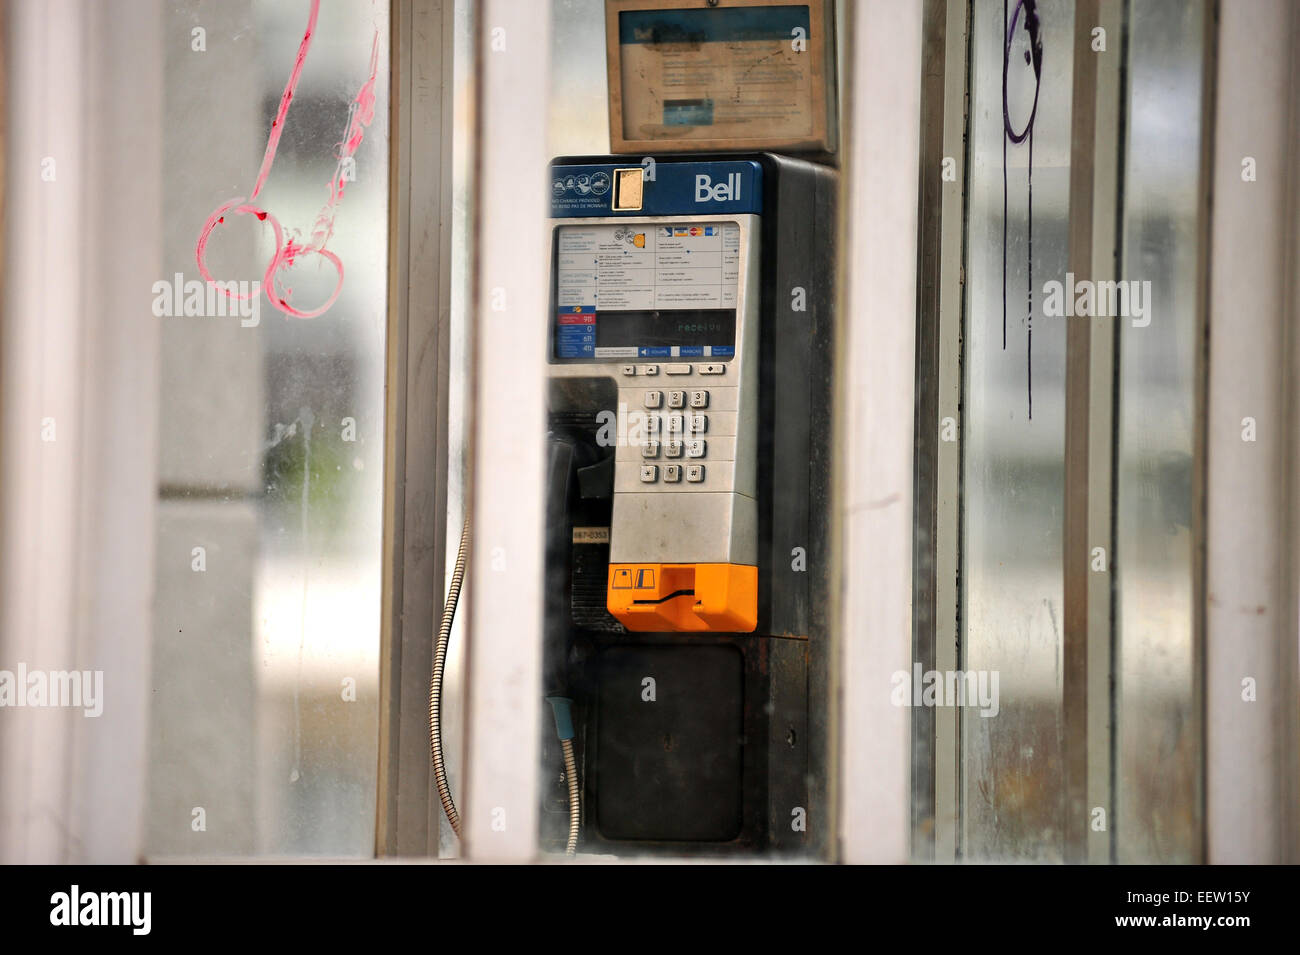 A vandalised Bell public telephone box in London, Ontario, Canada. Stock Photo